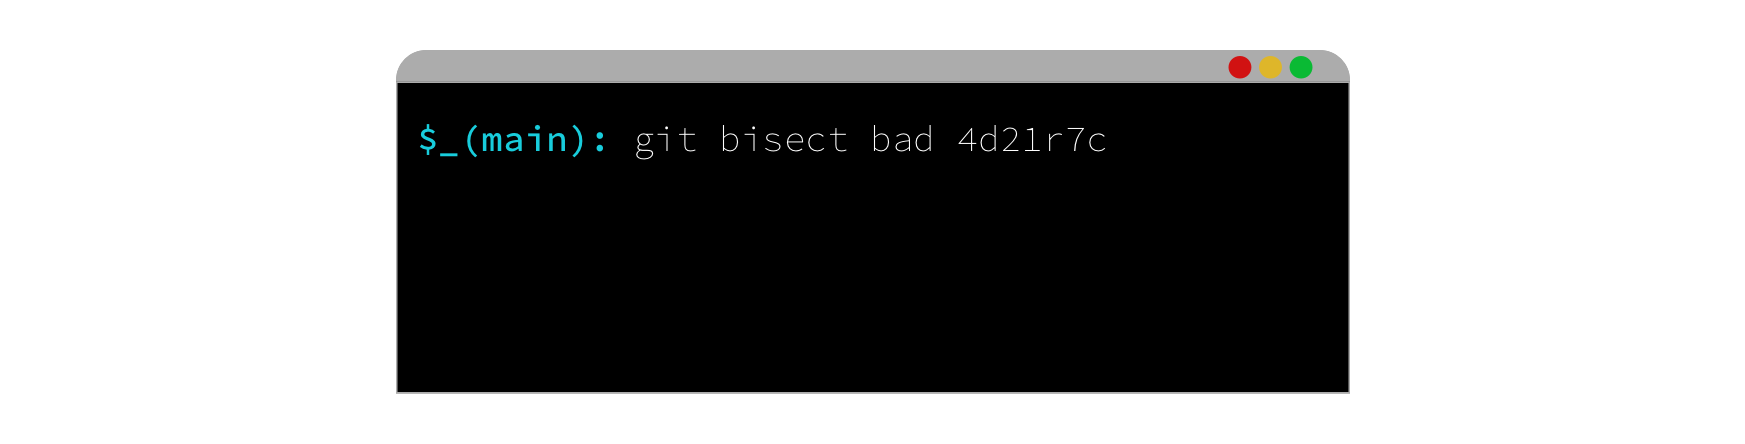 cli_bisect_bad.png